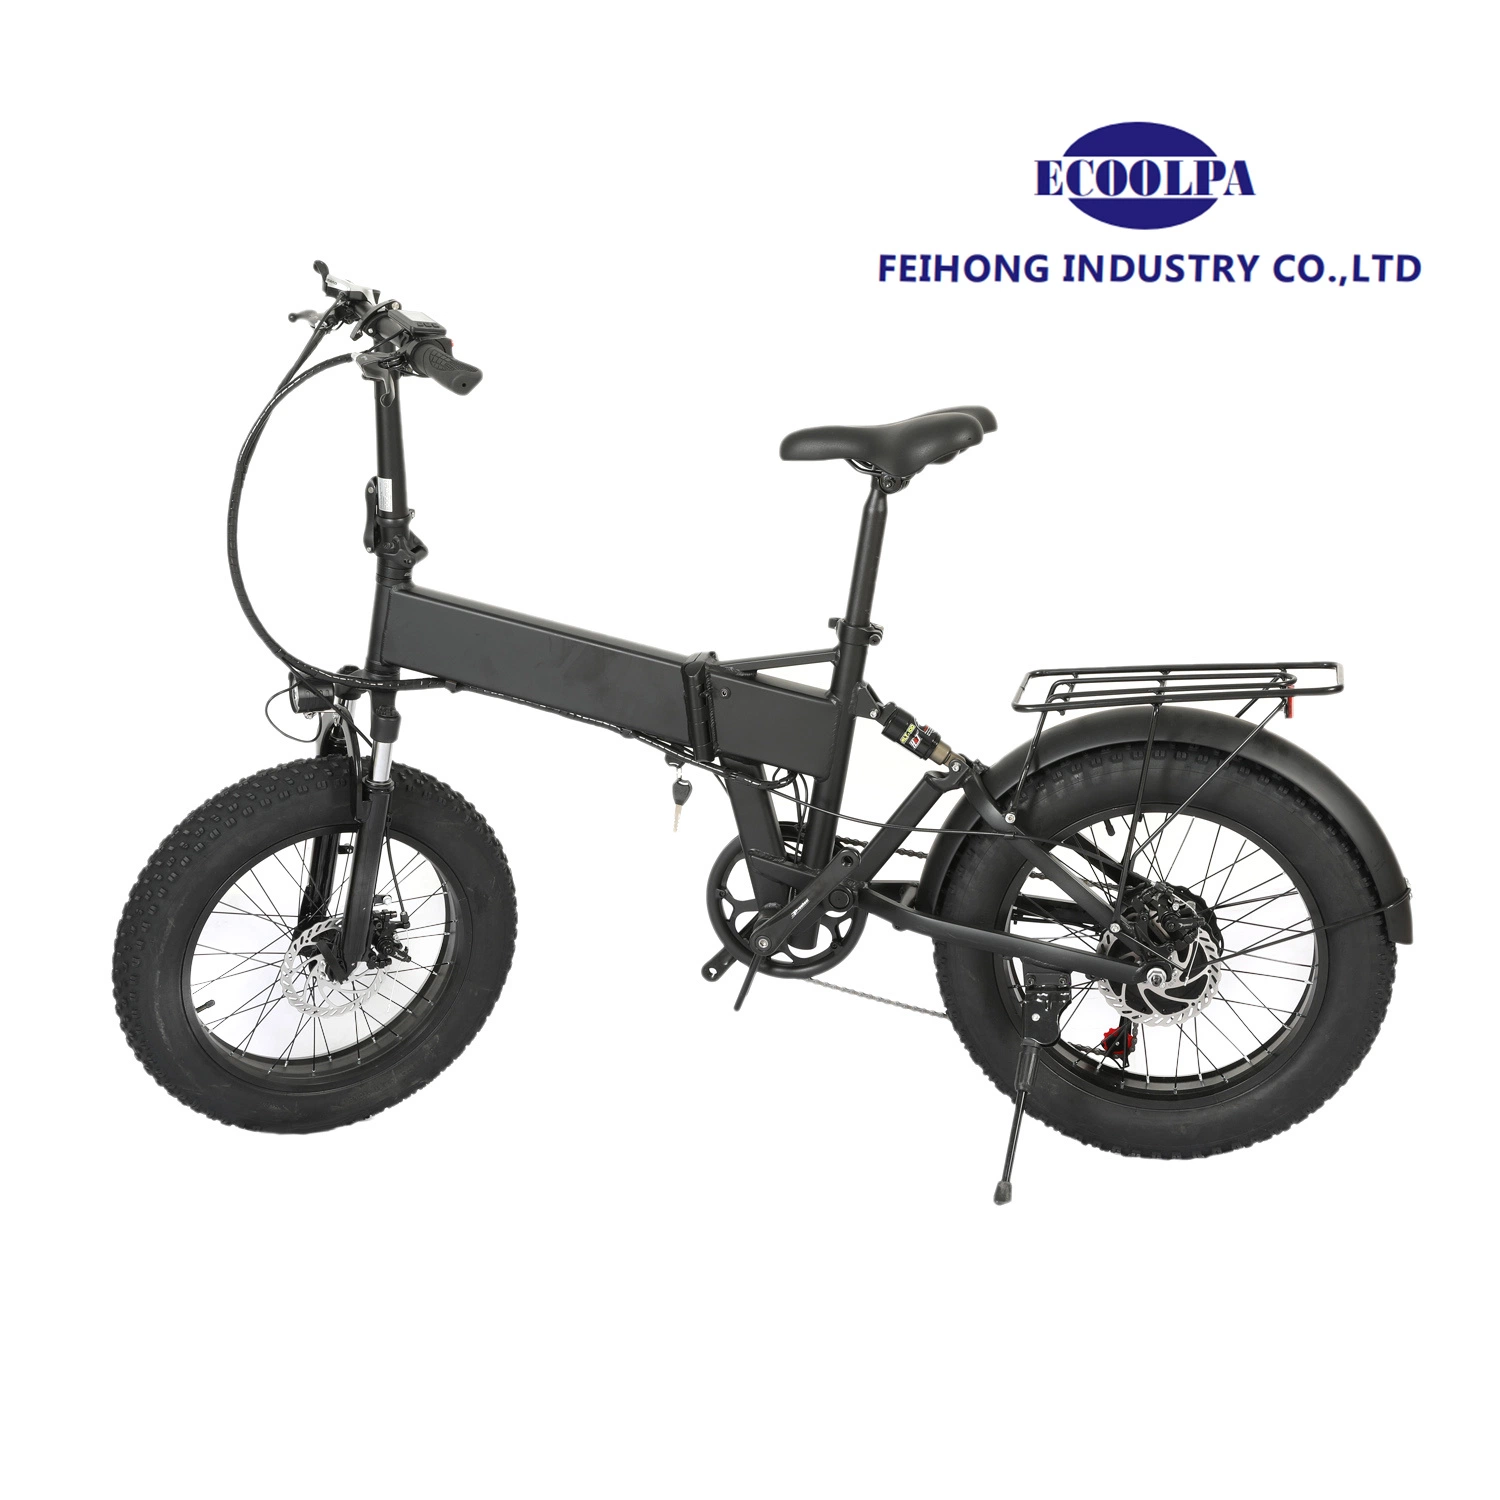 20" Motorcycle Electric Scooter Bicycle Electric Bike Electric Motorcycle Scooter Motor Scooter with 500W Motor Brushless 48V 10ah Battery Electirc Fat Bike